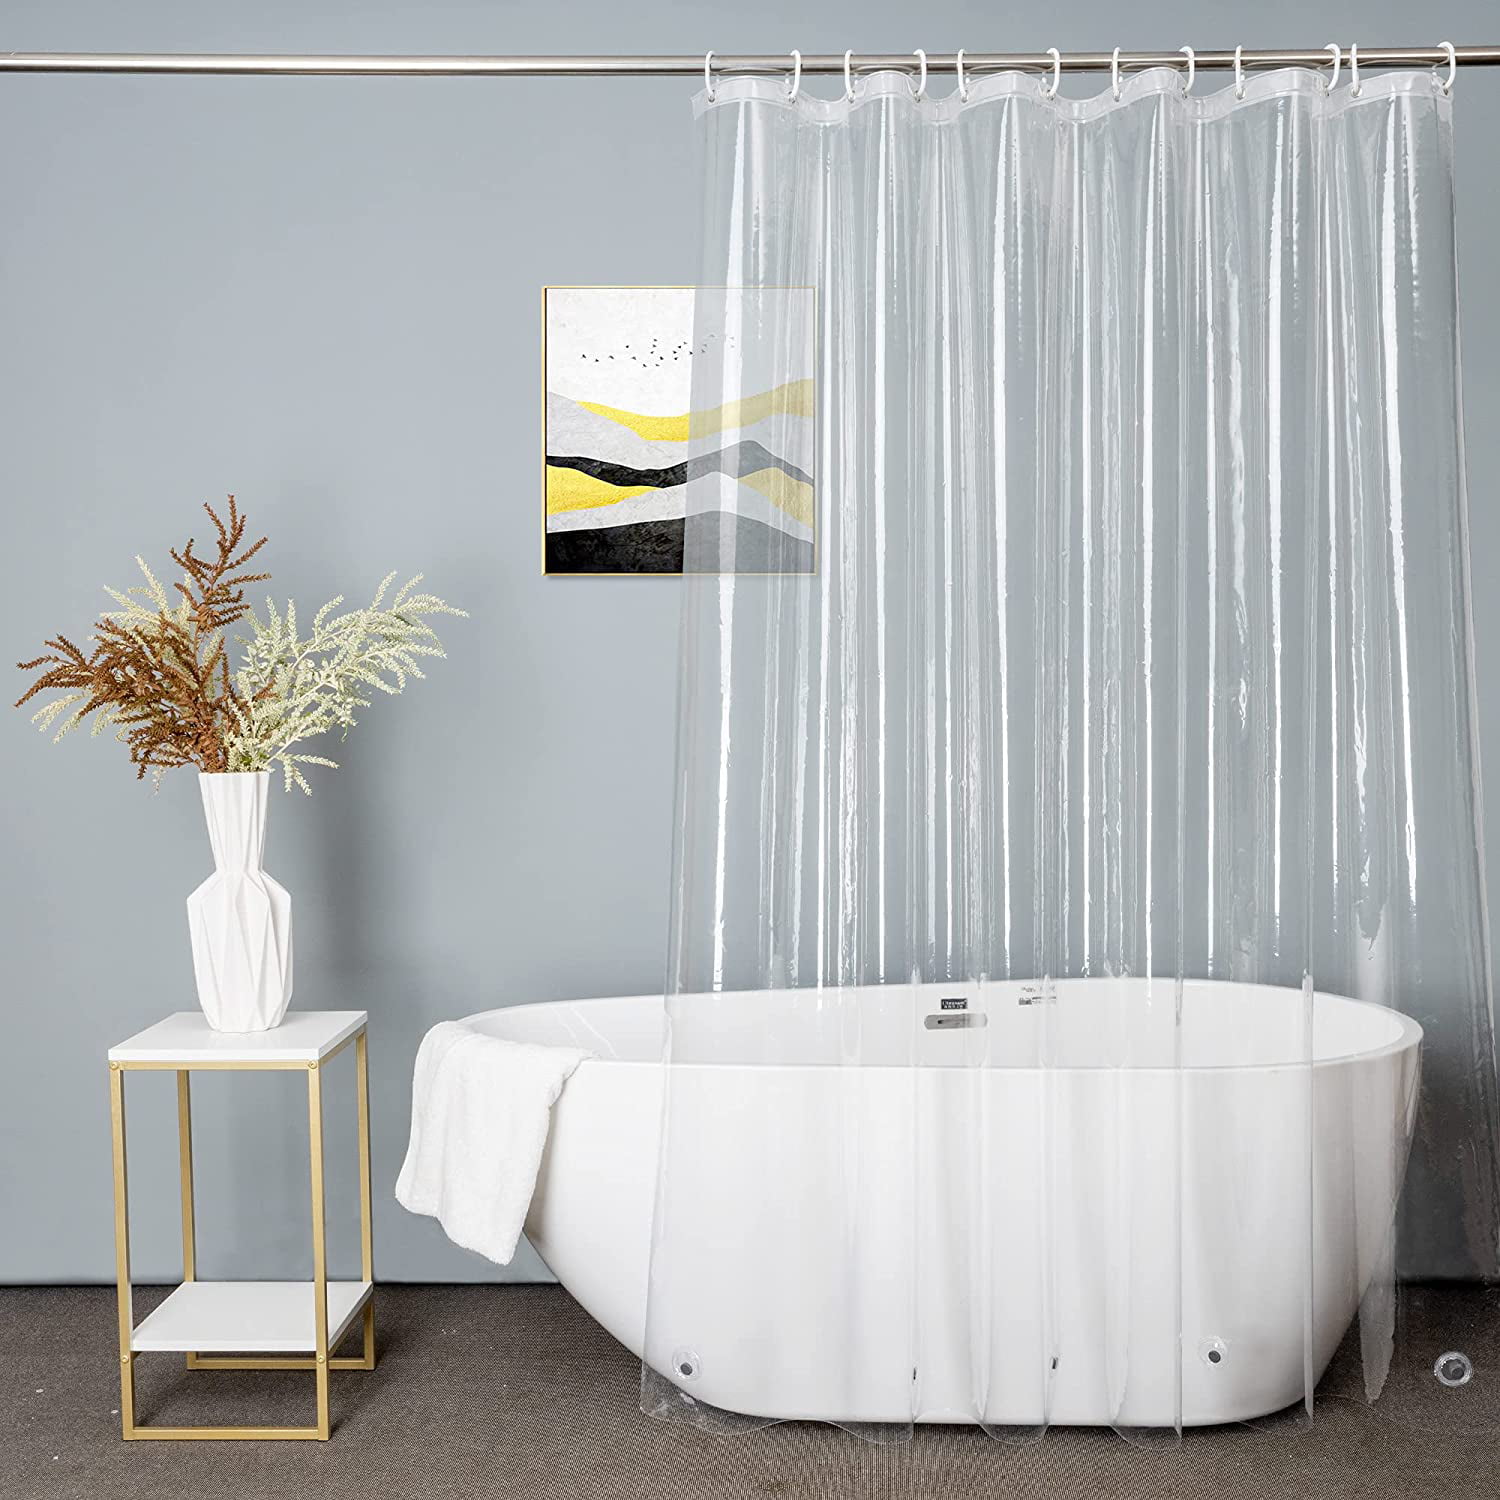 Frosted Shower Curtain Liner Eva Extra Long Shower Curtain 72x78 Inch 